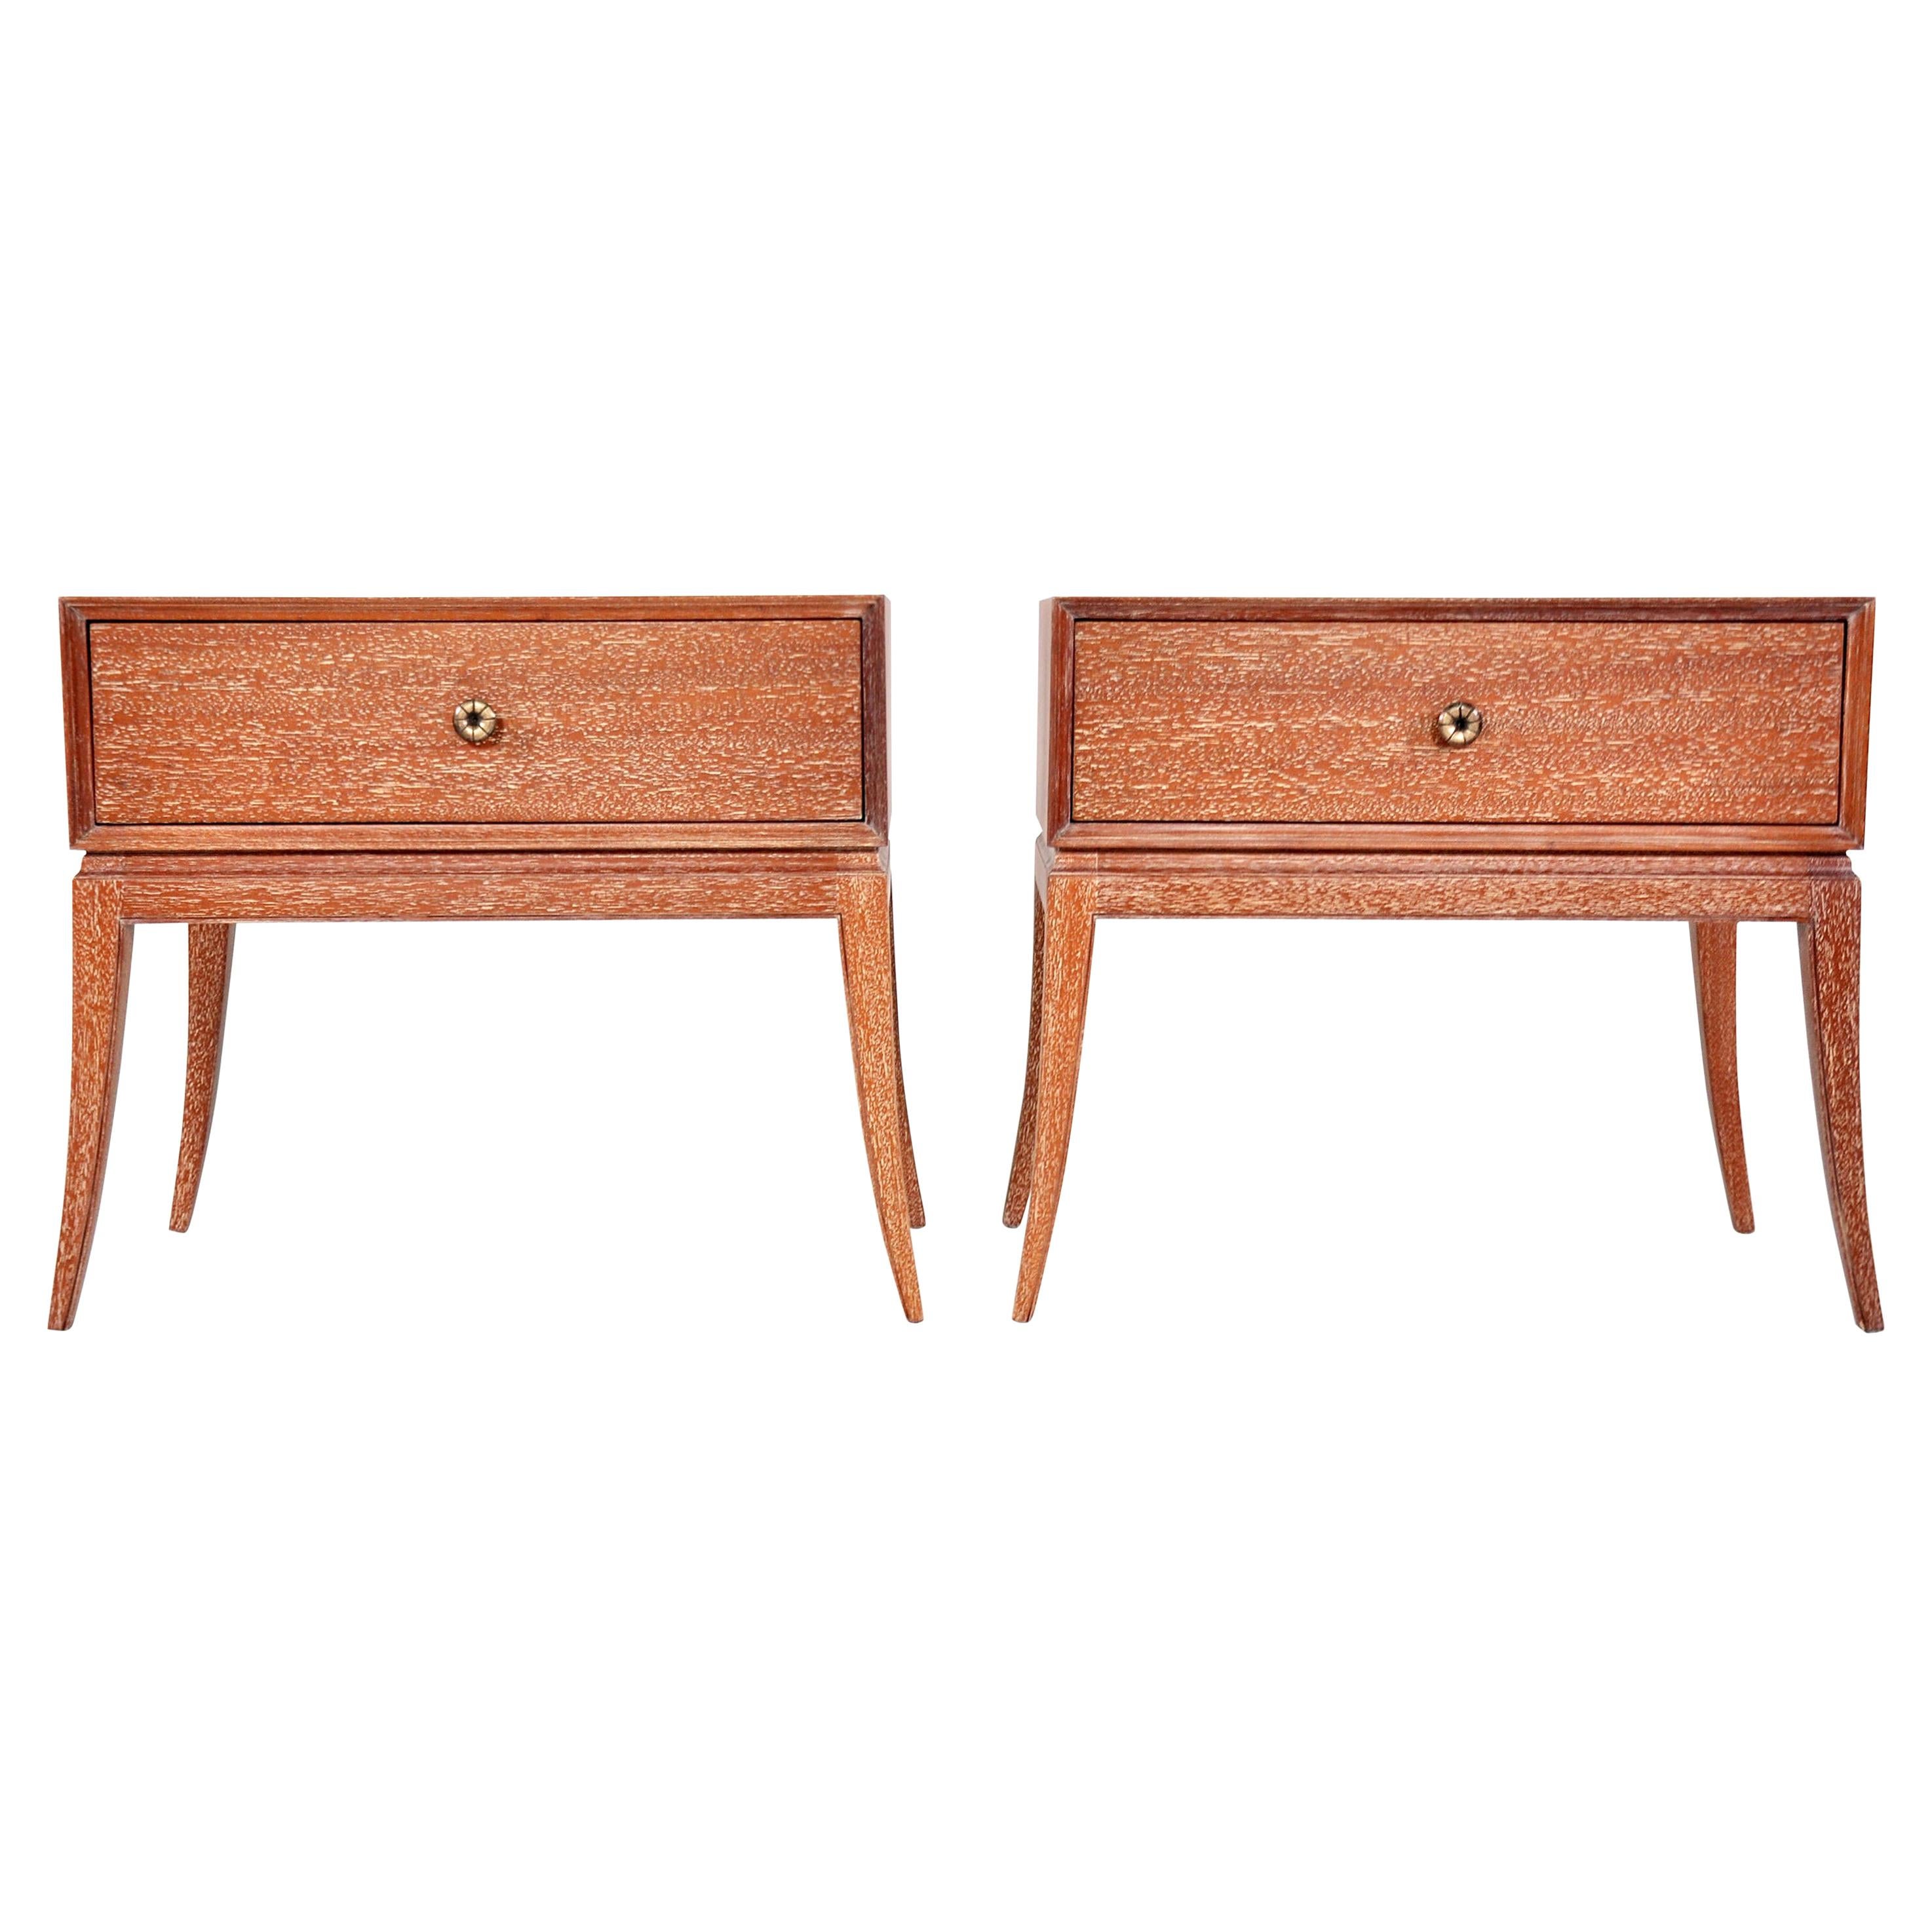 Pair of Tommi Parzinger Cerused Nightstands or Side Tables